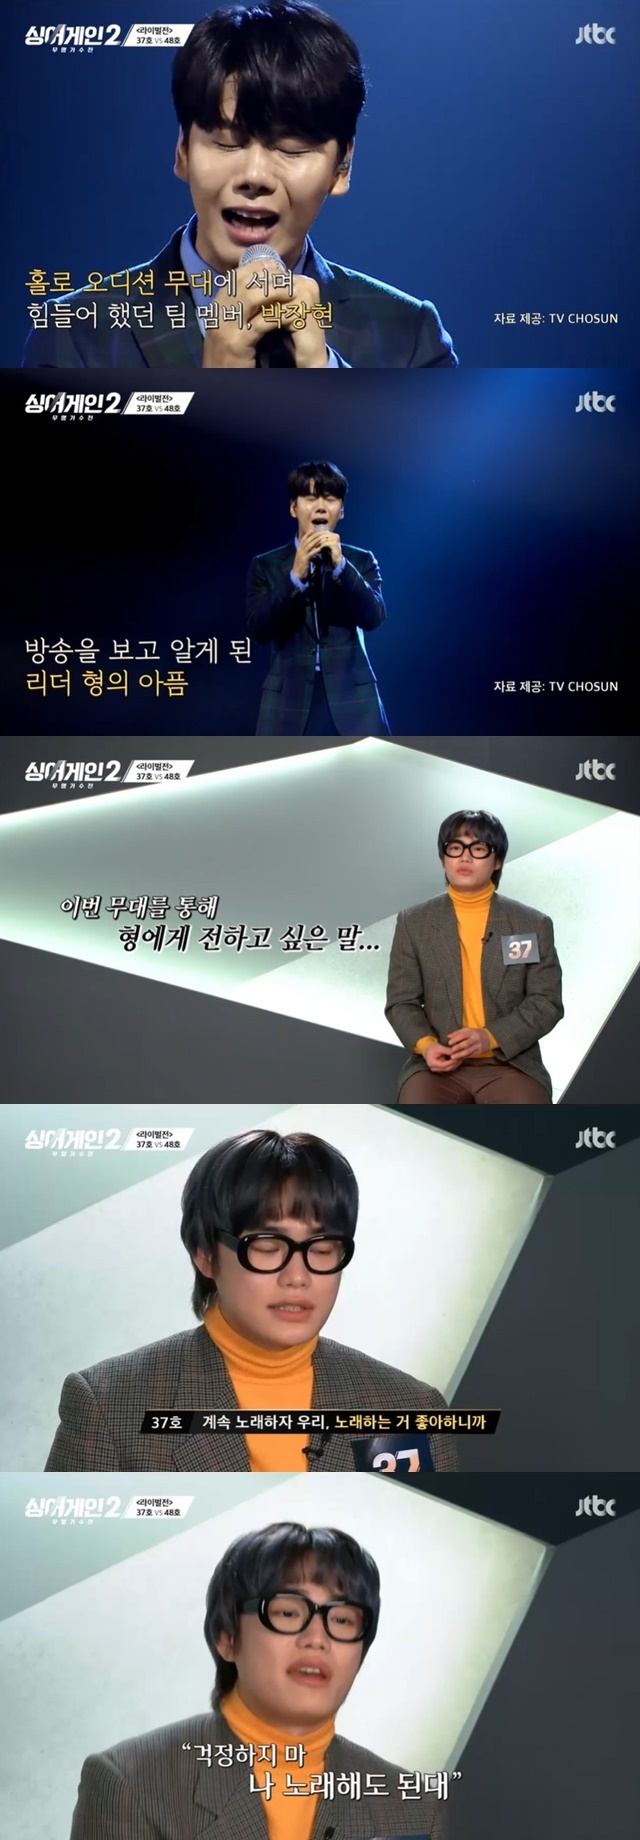 37 singer Bromance Park Hyun Kyu cheered on Park Jang-hyun, a group member who is appearing in other broadcasting auditions.In the JTBC entertainment program Sing Again 2 Unknown Singer Show, which was broadcast on January 10, a third round rivalry was held.On the day of the show, 37th Bromance Park Hyun Kyu and 48th Diede Anda were confronted.48 selected Namis sad relationship and received favorable reviews from judges for its appealing semi-apologetic singing skills.After 37 selected Jeon In-kwons No Worry You, judges expressed concern about the songs that have already been remade several times.In the second round, 37 was revived as Lee Hae-ris super-age, and Super-age was dramatically revived and added tension and sleepless.I was worried that I could not show a disappointing stage to Lee Hae-ri, who saved me. The team members are doing audition programs for other broadcasters, and we are singing because we have to do something because of the circumstances, said the 37th, explaining the reason for the selection.I didnt know it was that hard, and I felt very sick when I saw it, said Park Jang-hyun, a bromance star who is appearing in the audition for the TV-Korean National Singer.Weve had a tough time together, so we can sing together, because weve come out with a wish to be all right. Well keep singing.Im worried about how you can do well around me, and Ill try to make a stage that can be a little comfort to people who worry about me and those who worry about me.